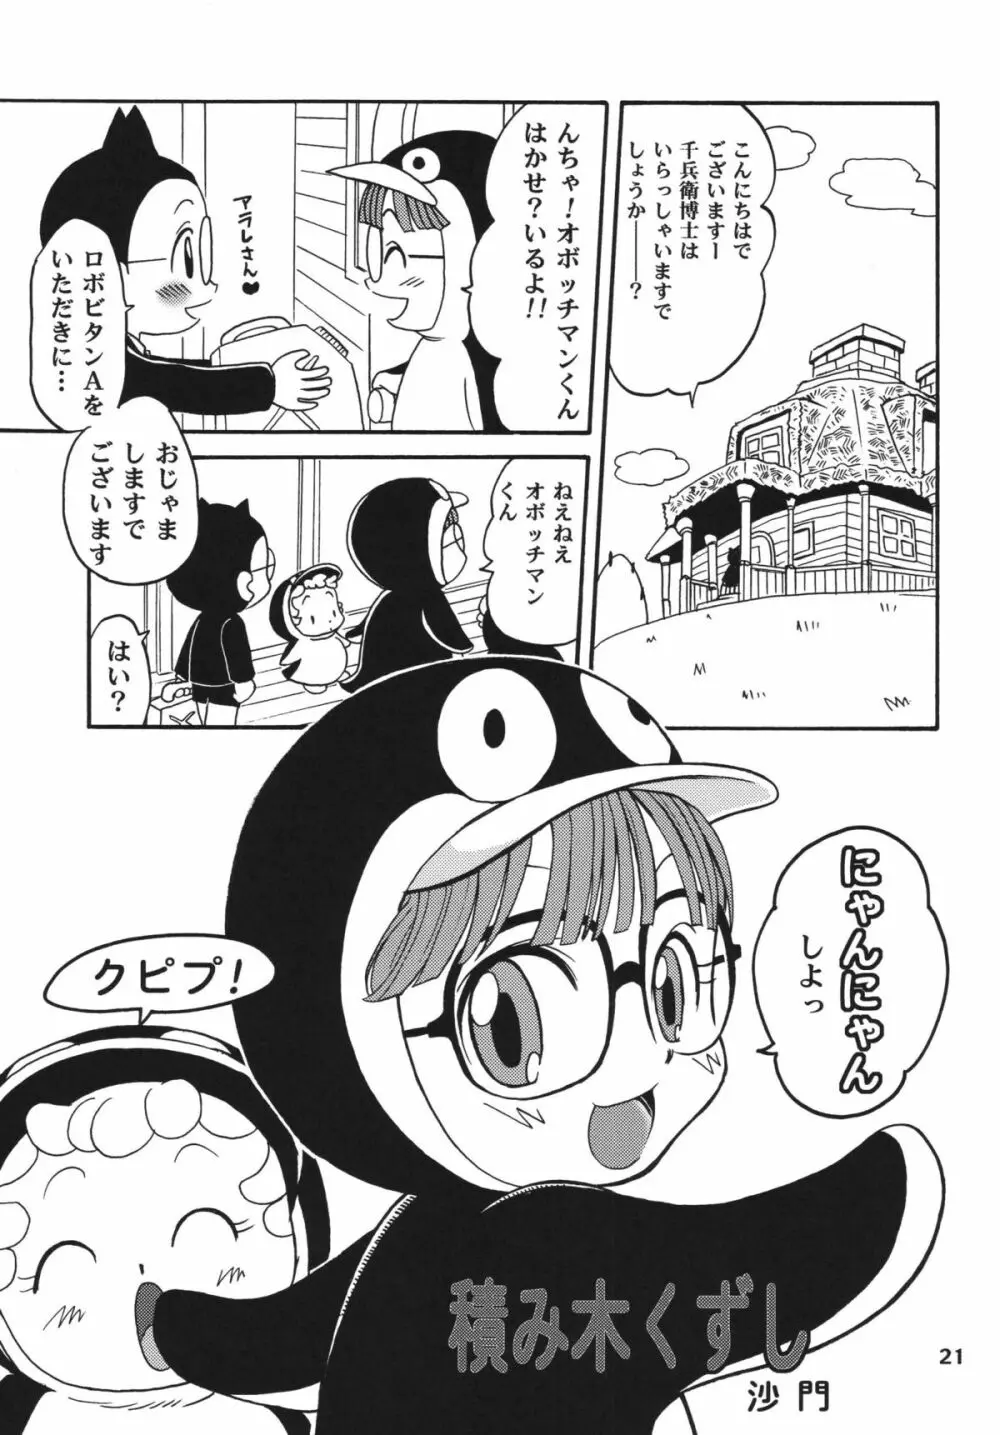 PROJECT ARALE 2 - page21